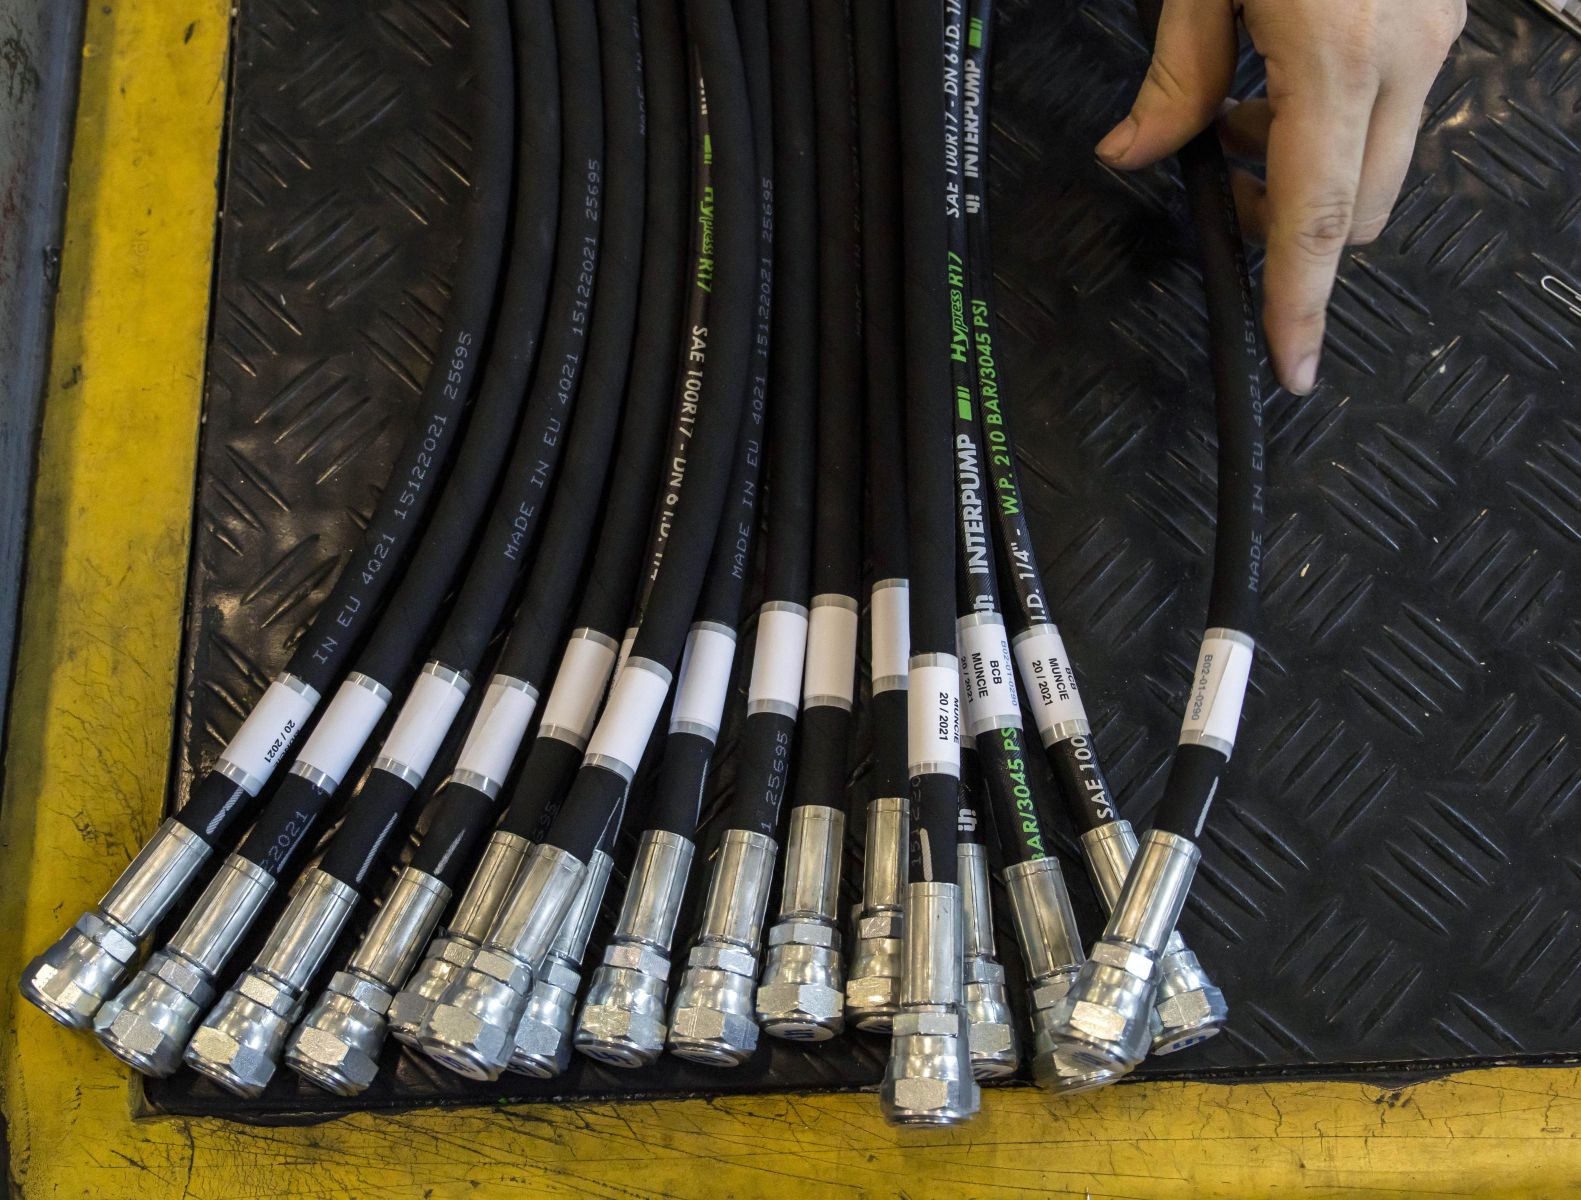 An image of several hydraulic hose assemblies with labels attached near the fittings in a pile.